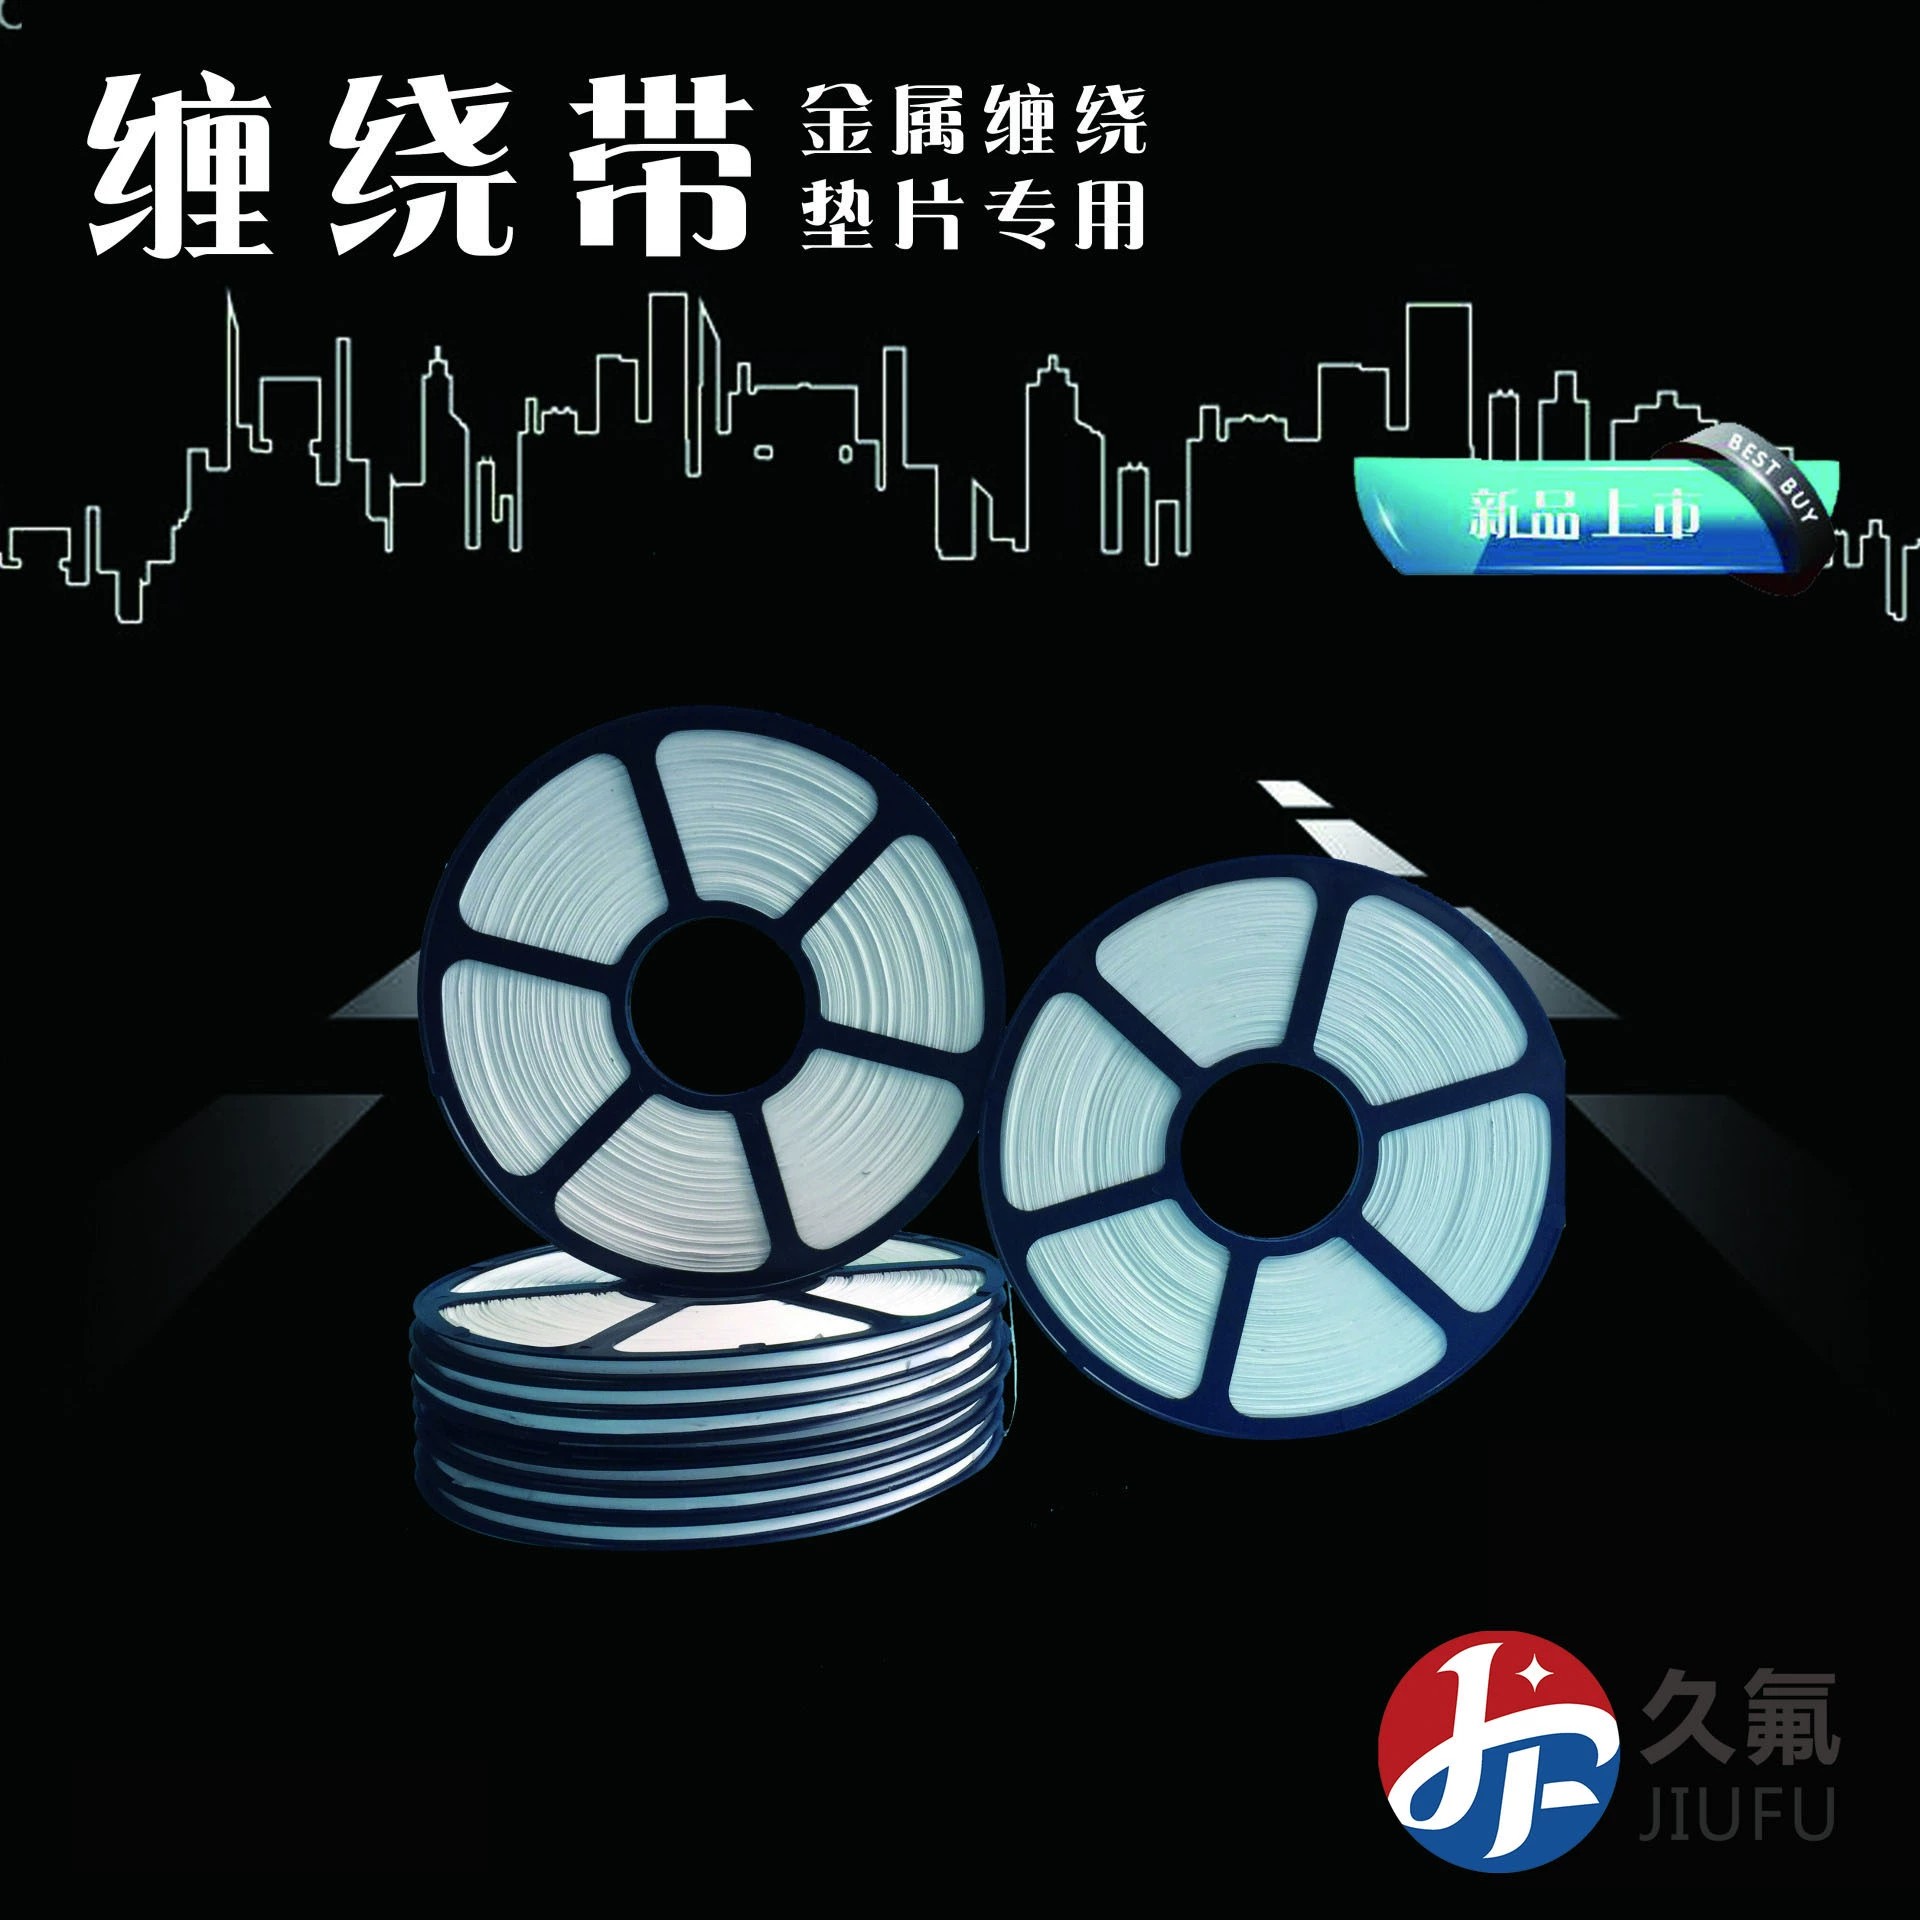 Hot selling spiral wound gasket filled expanded ptfe tape with great price